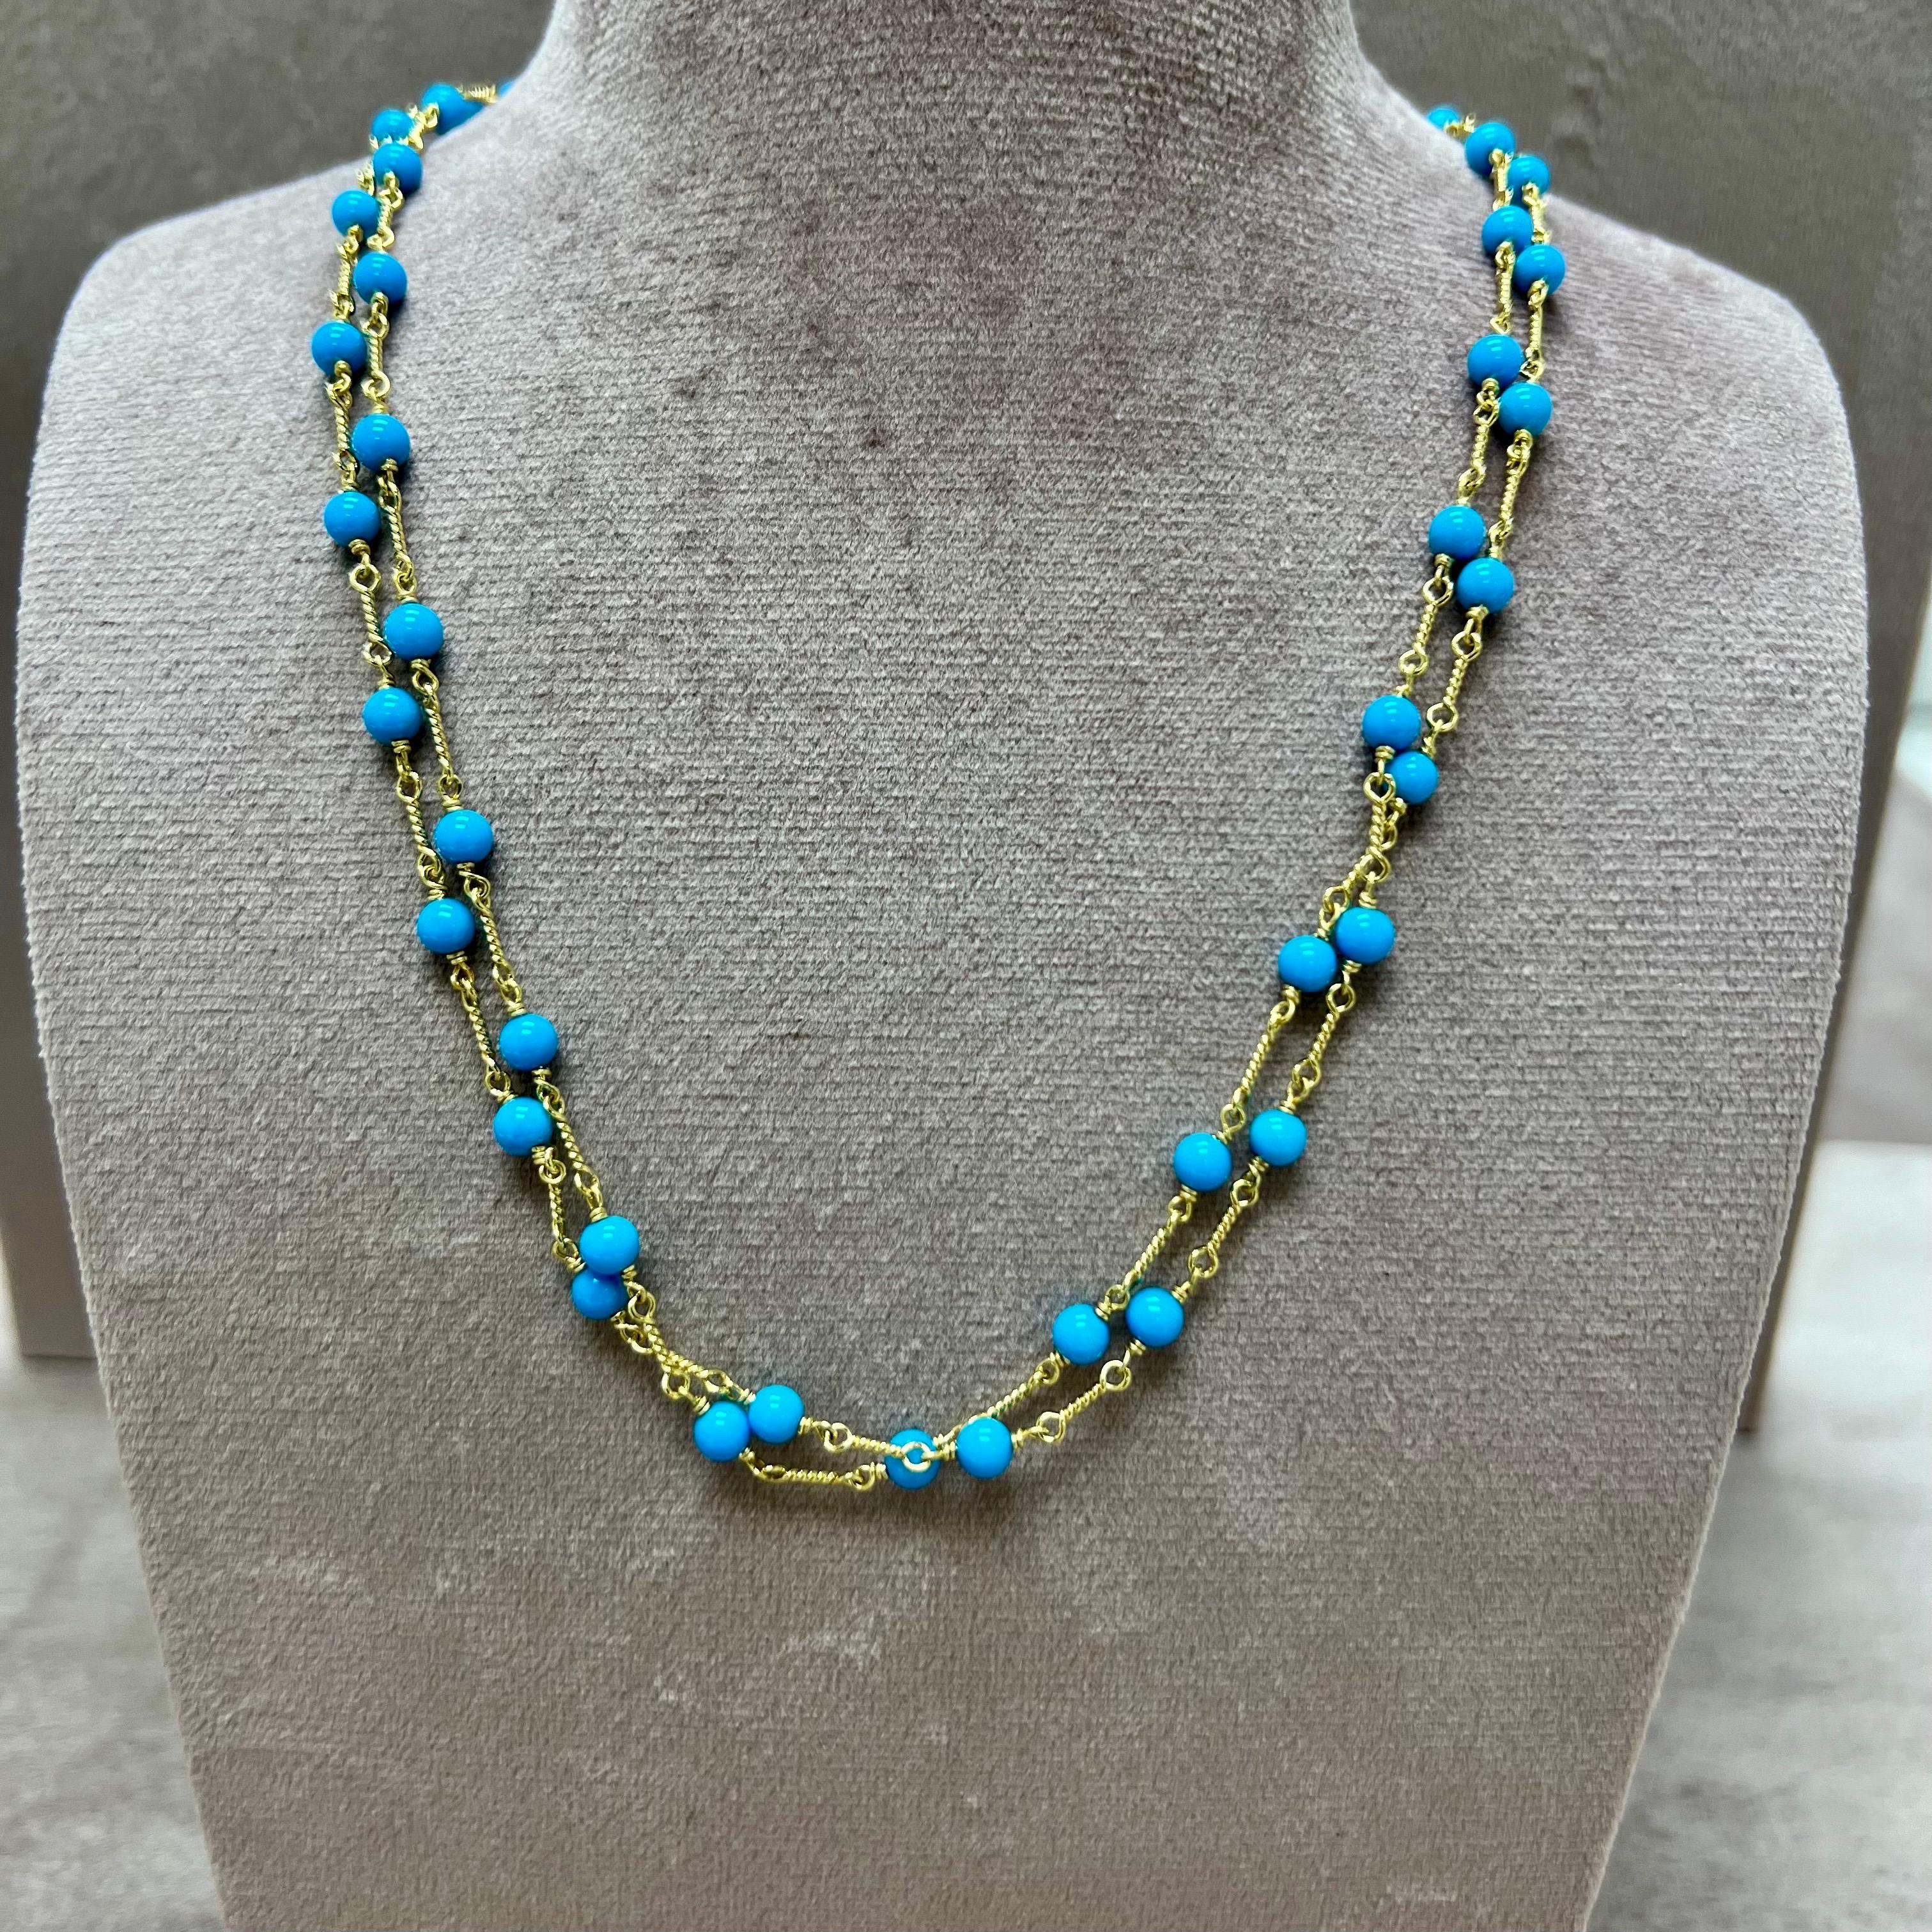 Created in 18 karat yellow gold
32 inch length
Sleeping Beauty Turquoise small beads
18kyg lobster clasp
Limited edition


About the Designers

Drawing inspiration from little things, Dharmesh & Namrata Kothari have created an extraordinary and